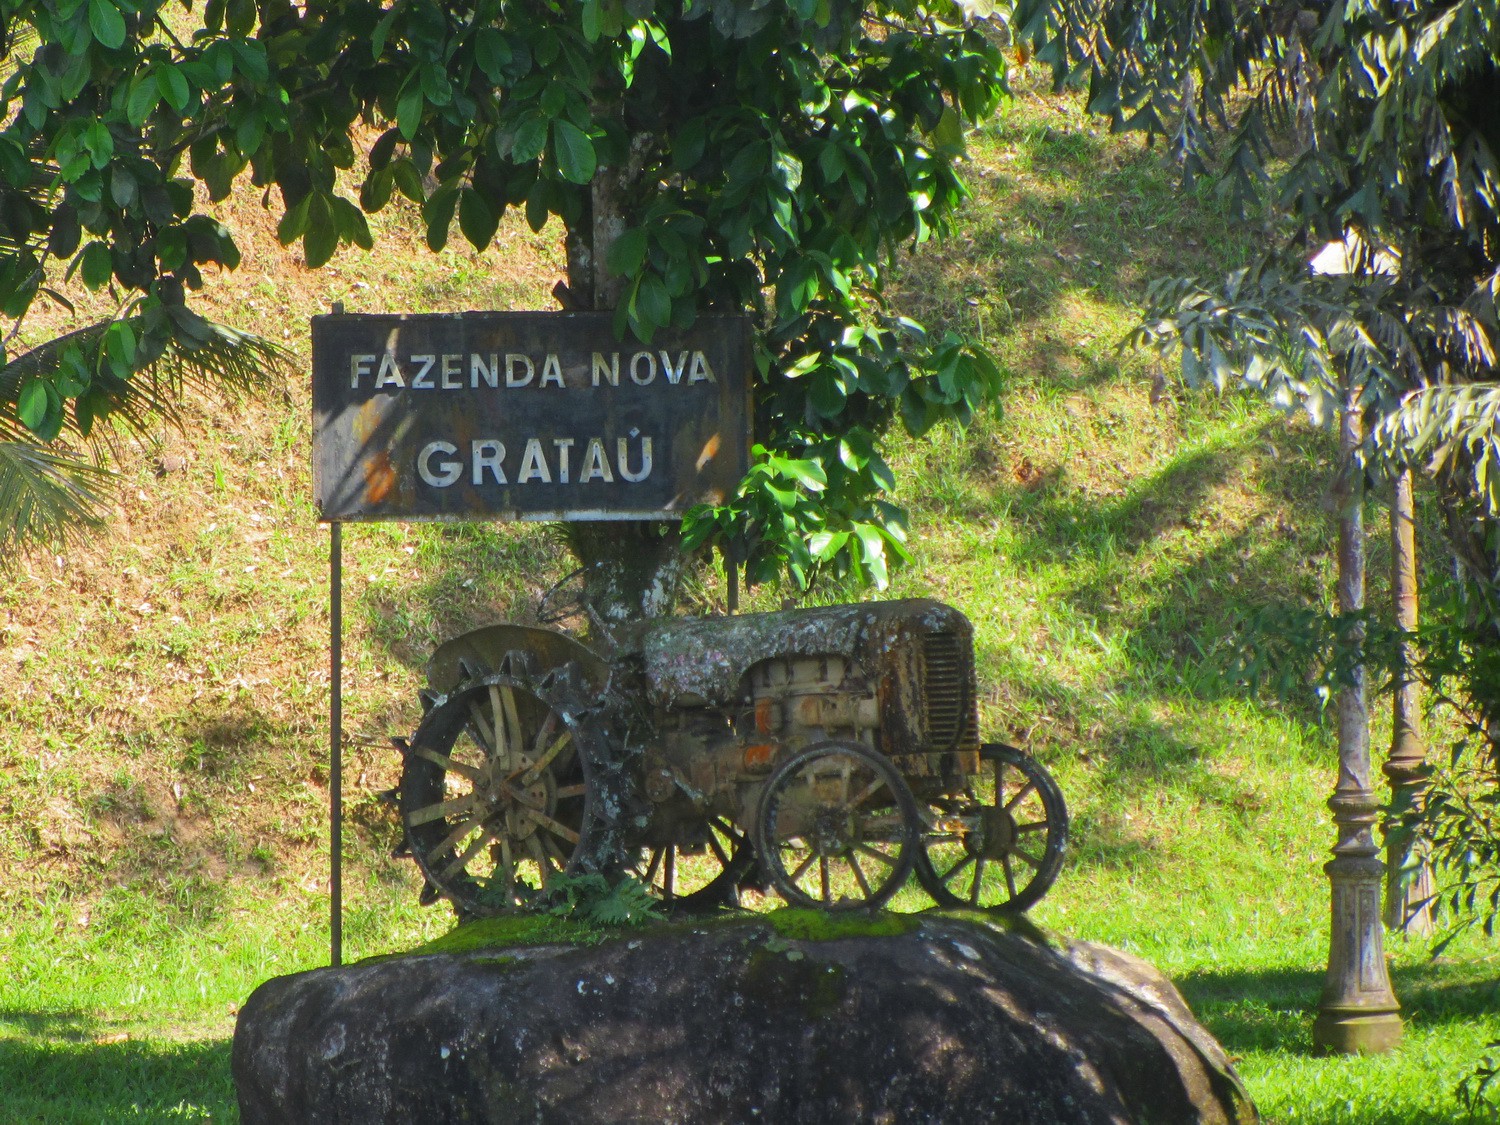 Ancient tractor on the farm New Gratau between Paraty and Angra dos Reis